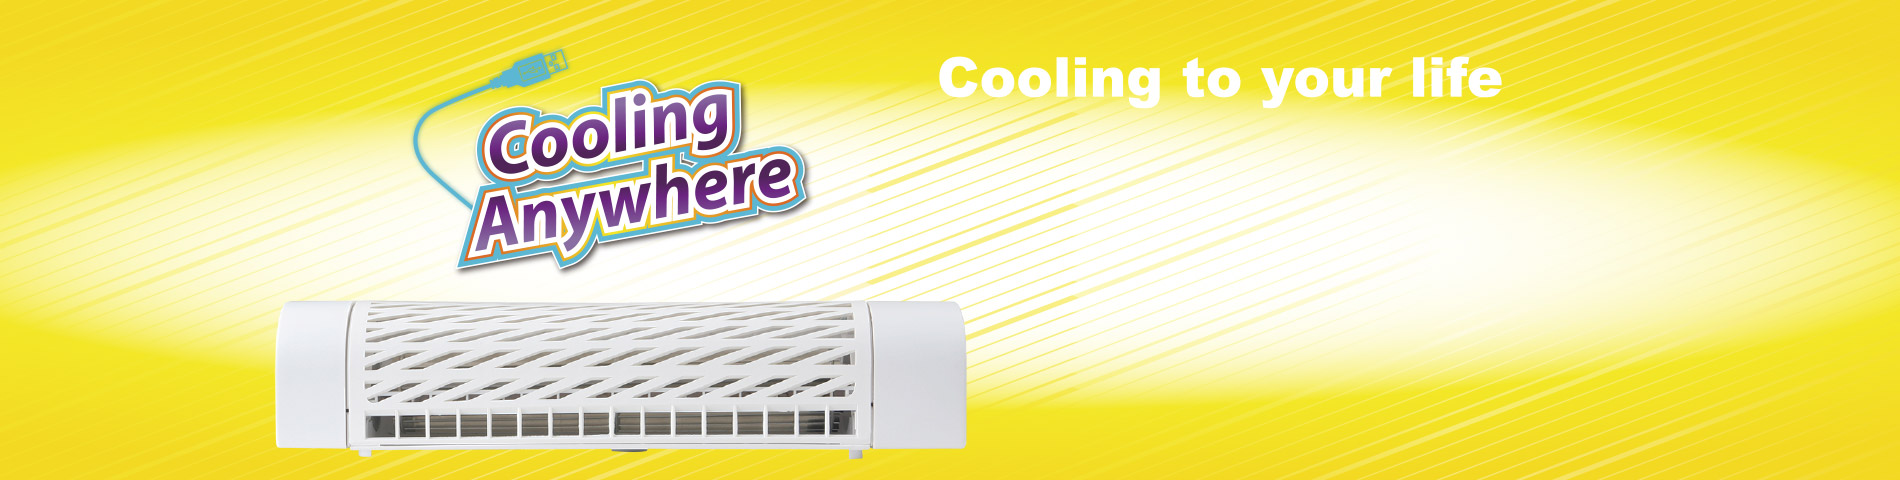 Cooling Fan Anywhere For Better Cool Life